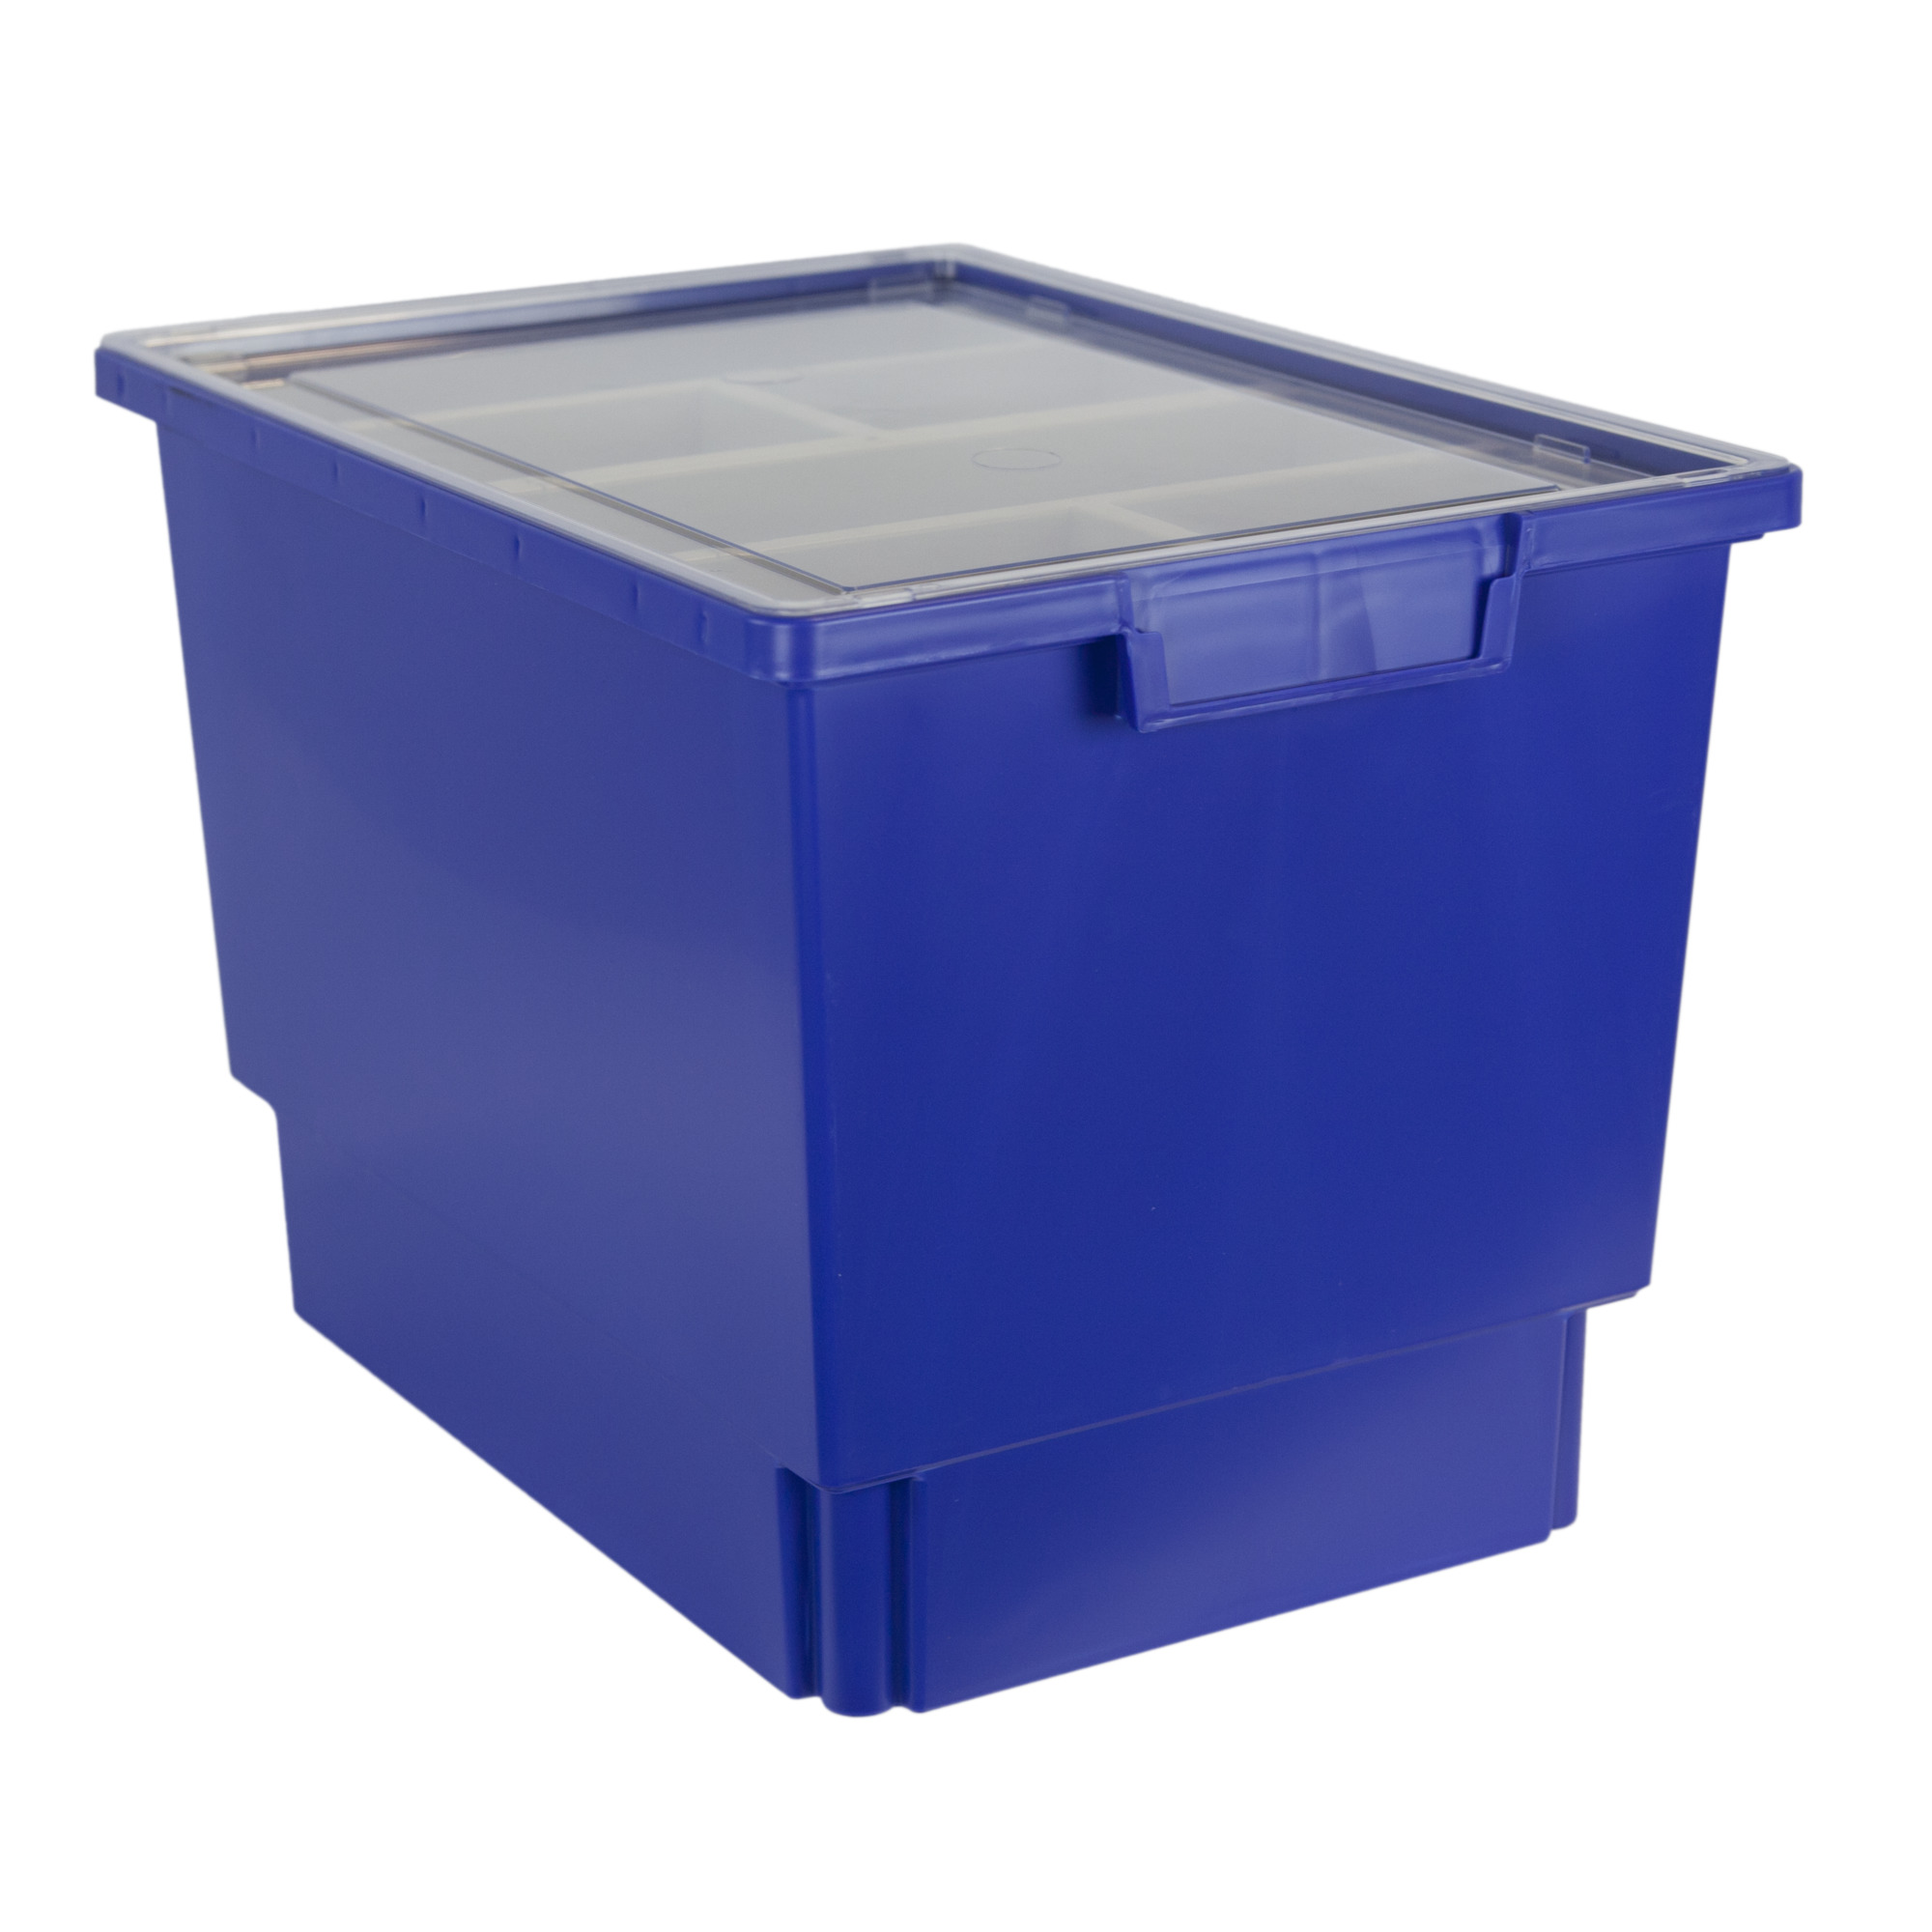 Certwood StorWerks, Slim Line 12Inch Tray Kit (3 x Divisions) Blue, Included (qty.) 1, Material Plastic, Height 12 in, Model CE1954PB-NK0202-1